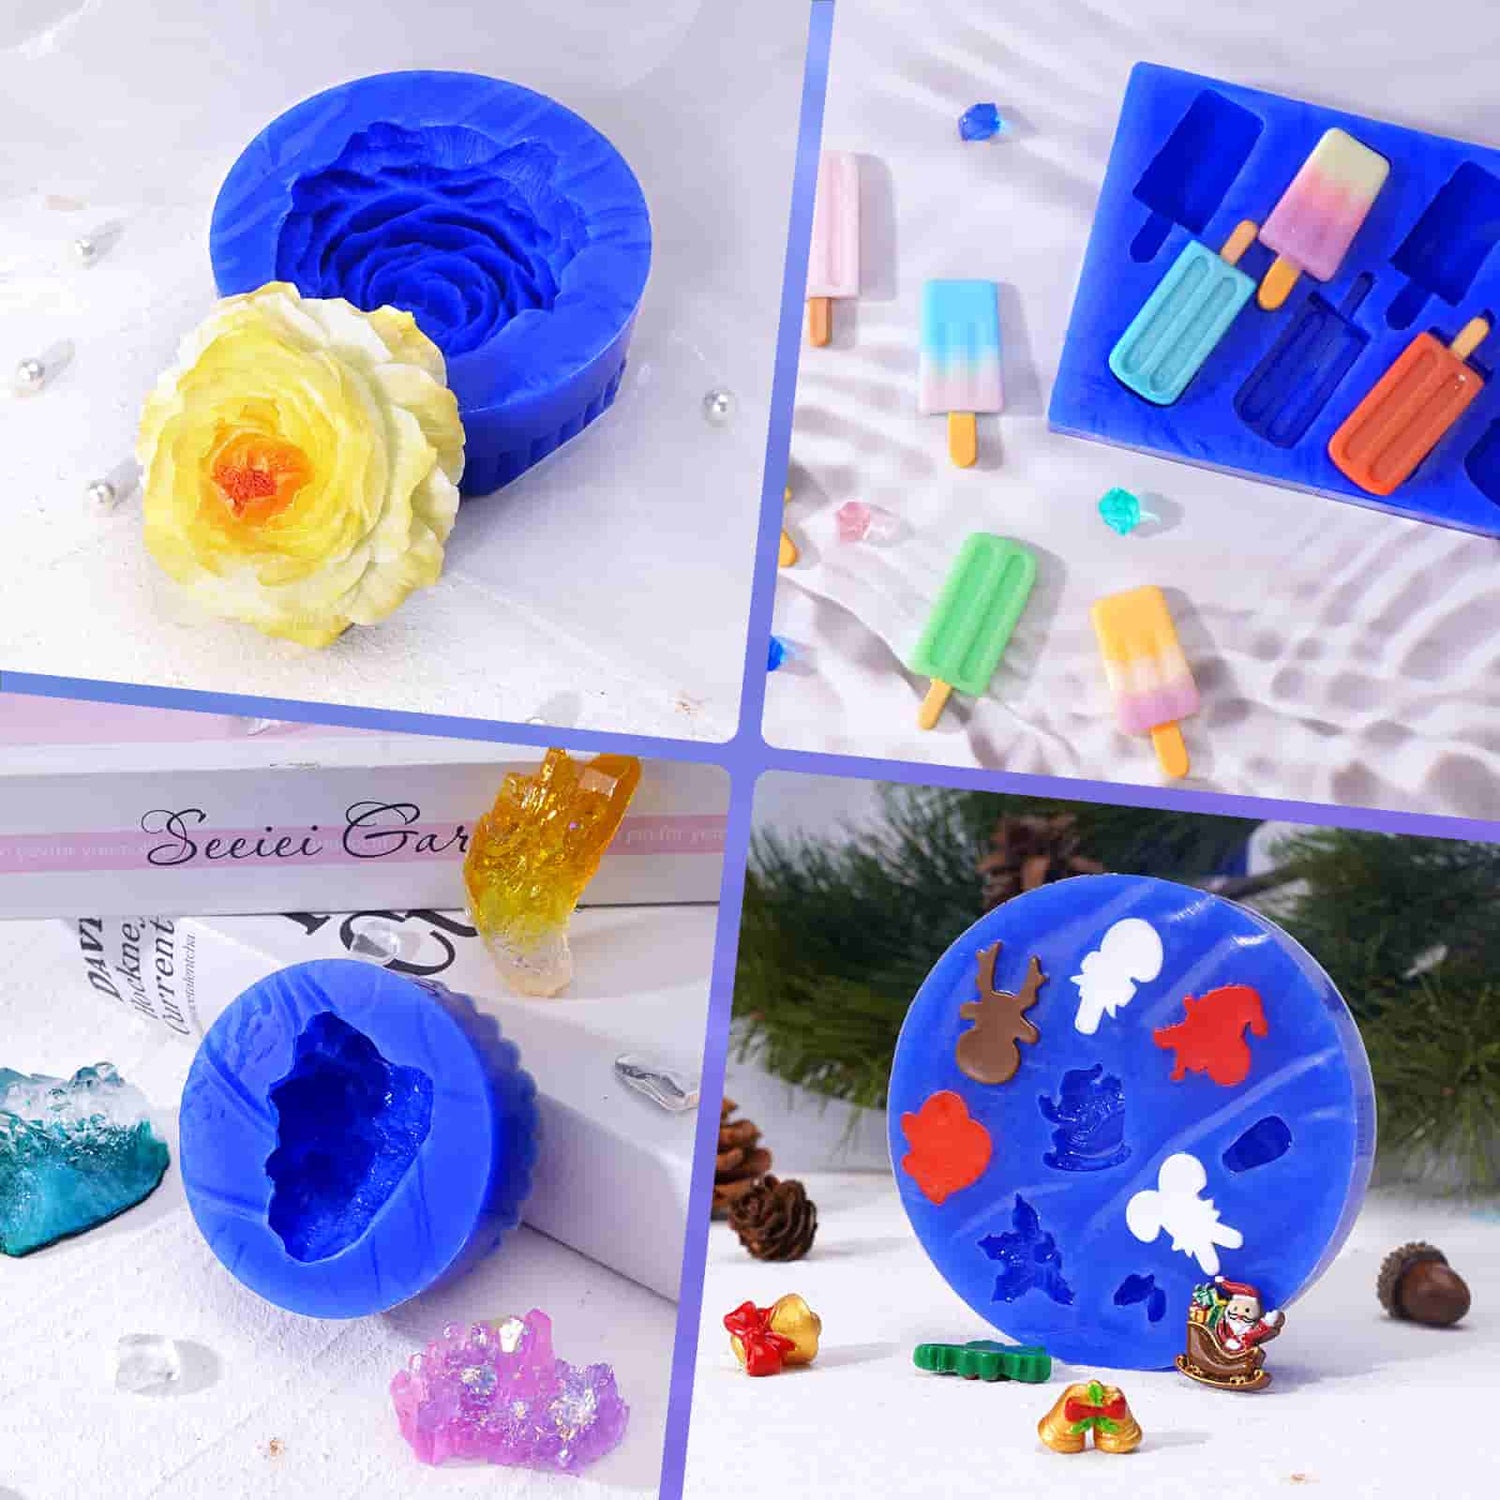 LET'S RESIN Silicone Mold Making Kit, 30A Liquid Silicone Rubber